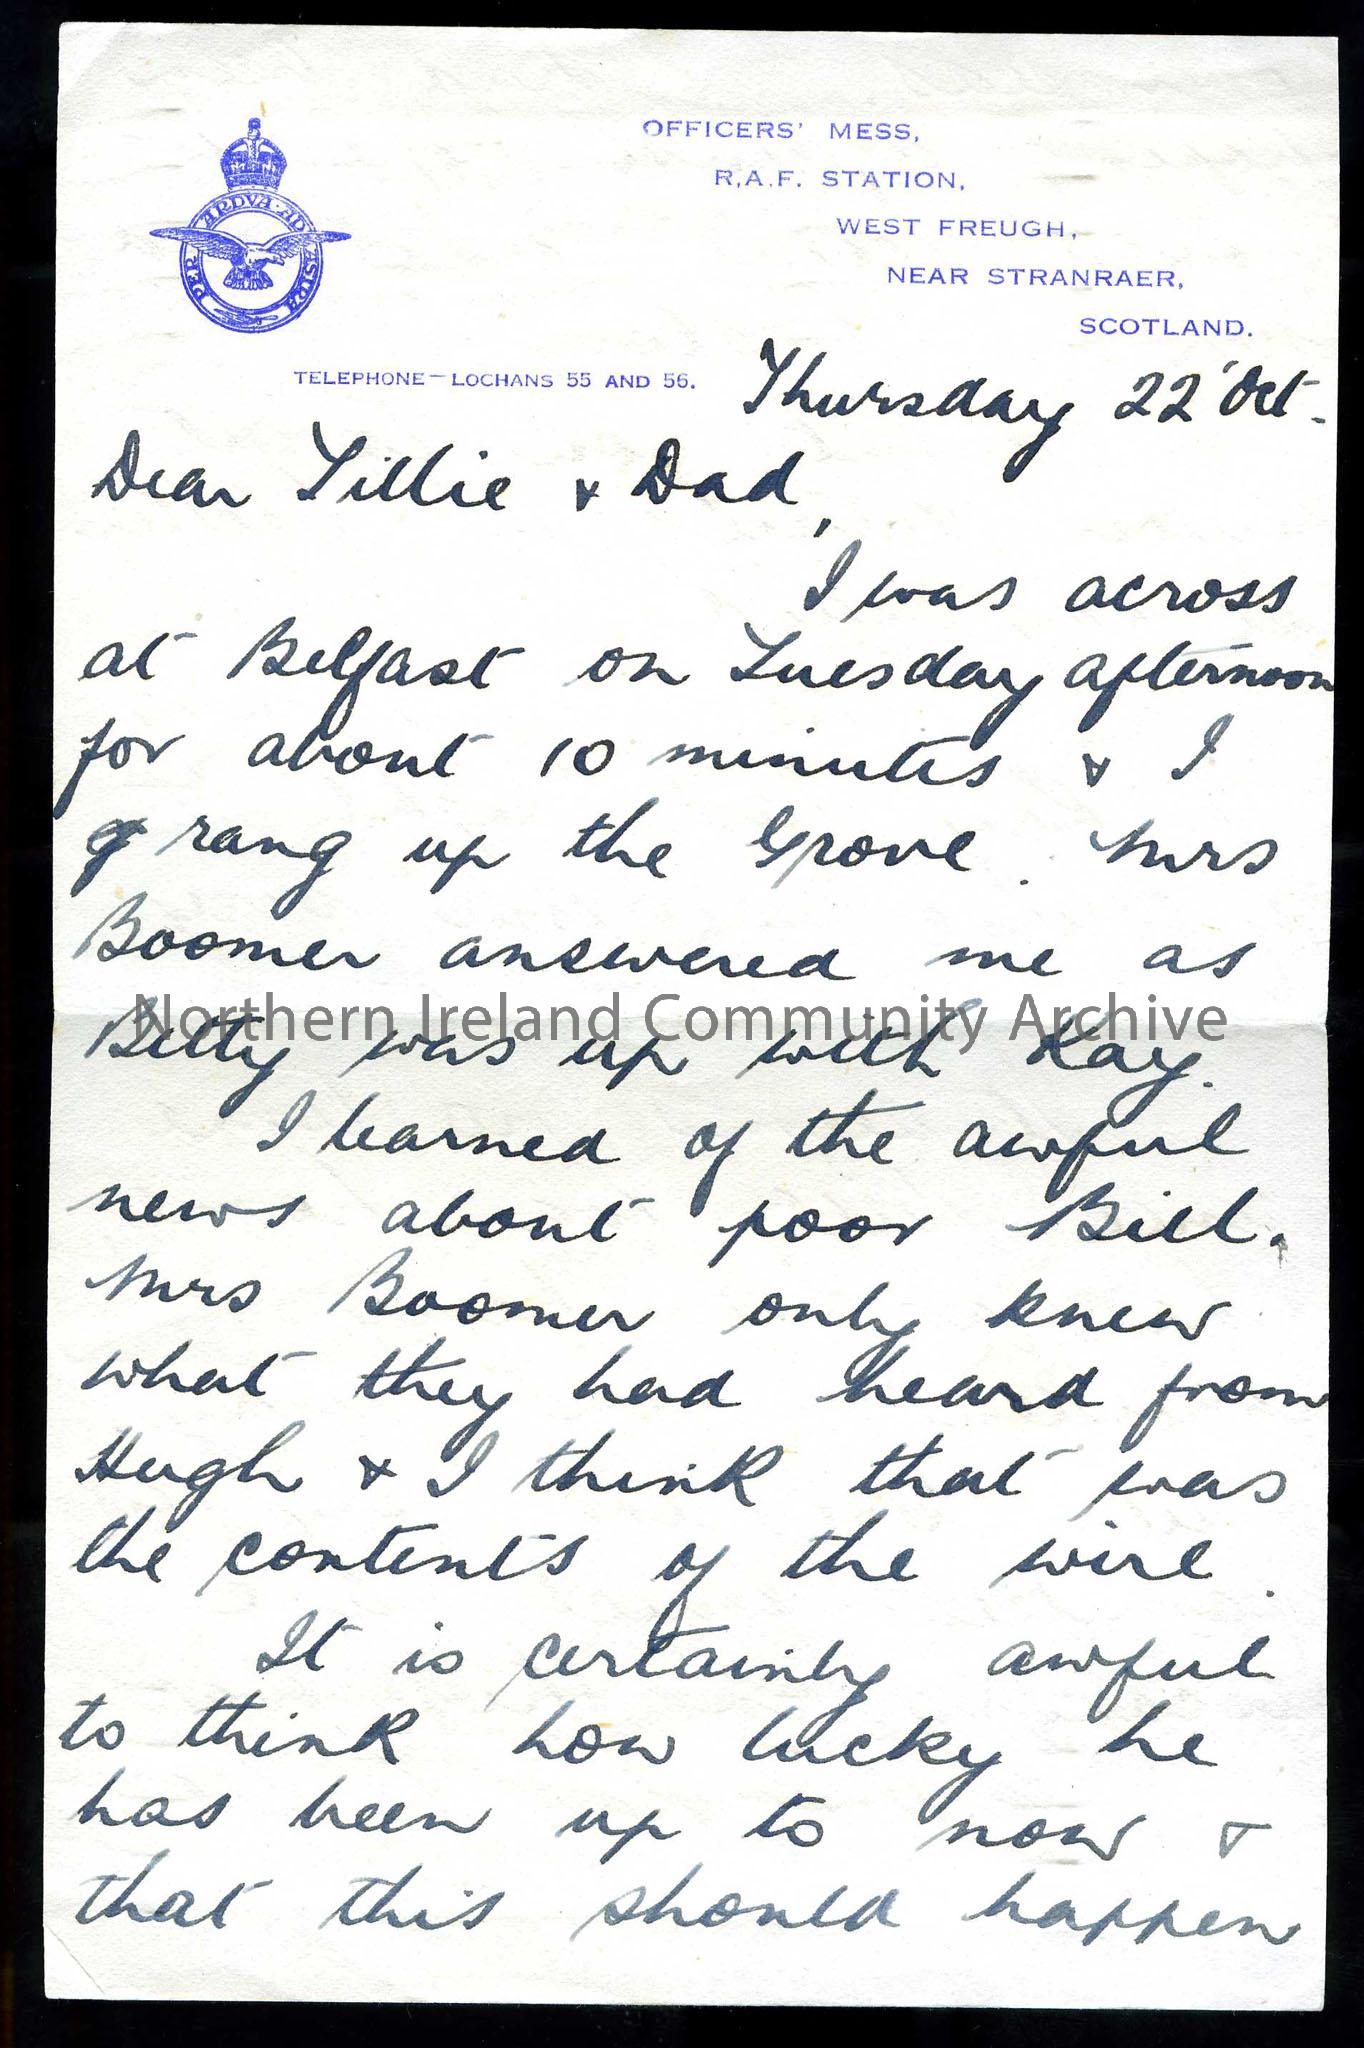 Page one of two – Addressed to Tillie and Dad from Jack (Bill’s brother). Sent from Officers’ Mess, R.A.F. Station, West Freugh, Near Stranraer, Scotl… – Scan814.1